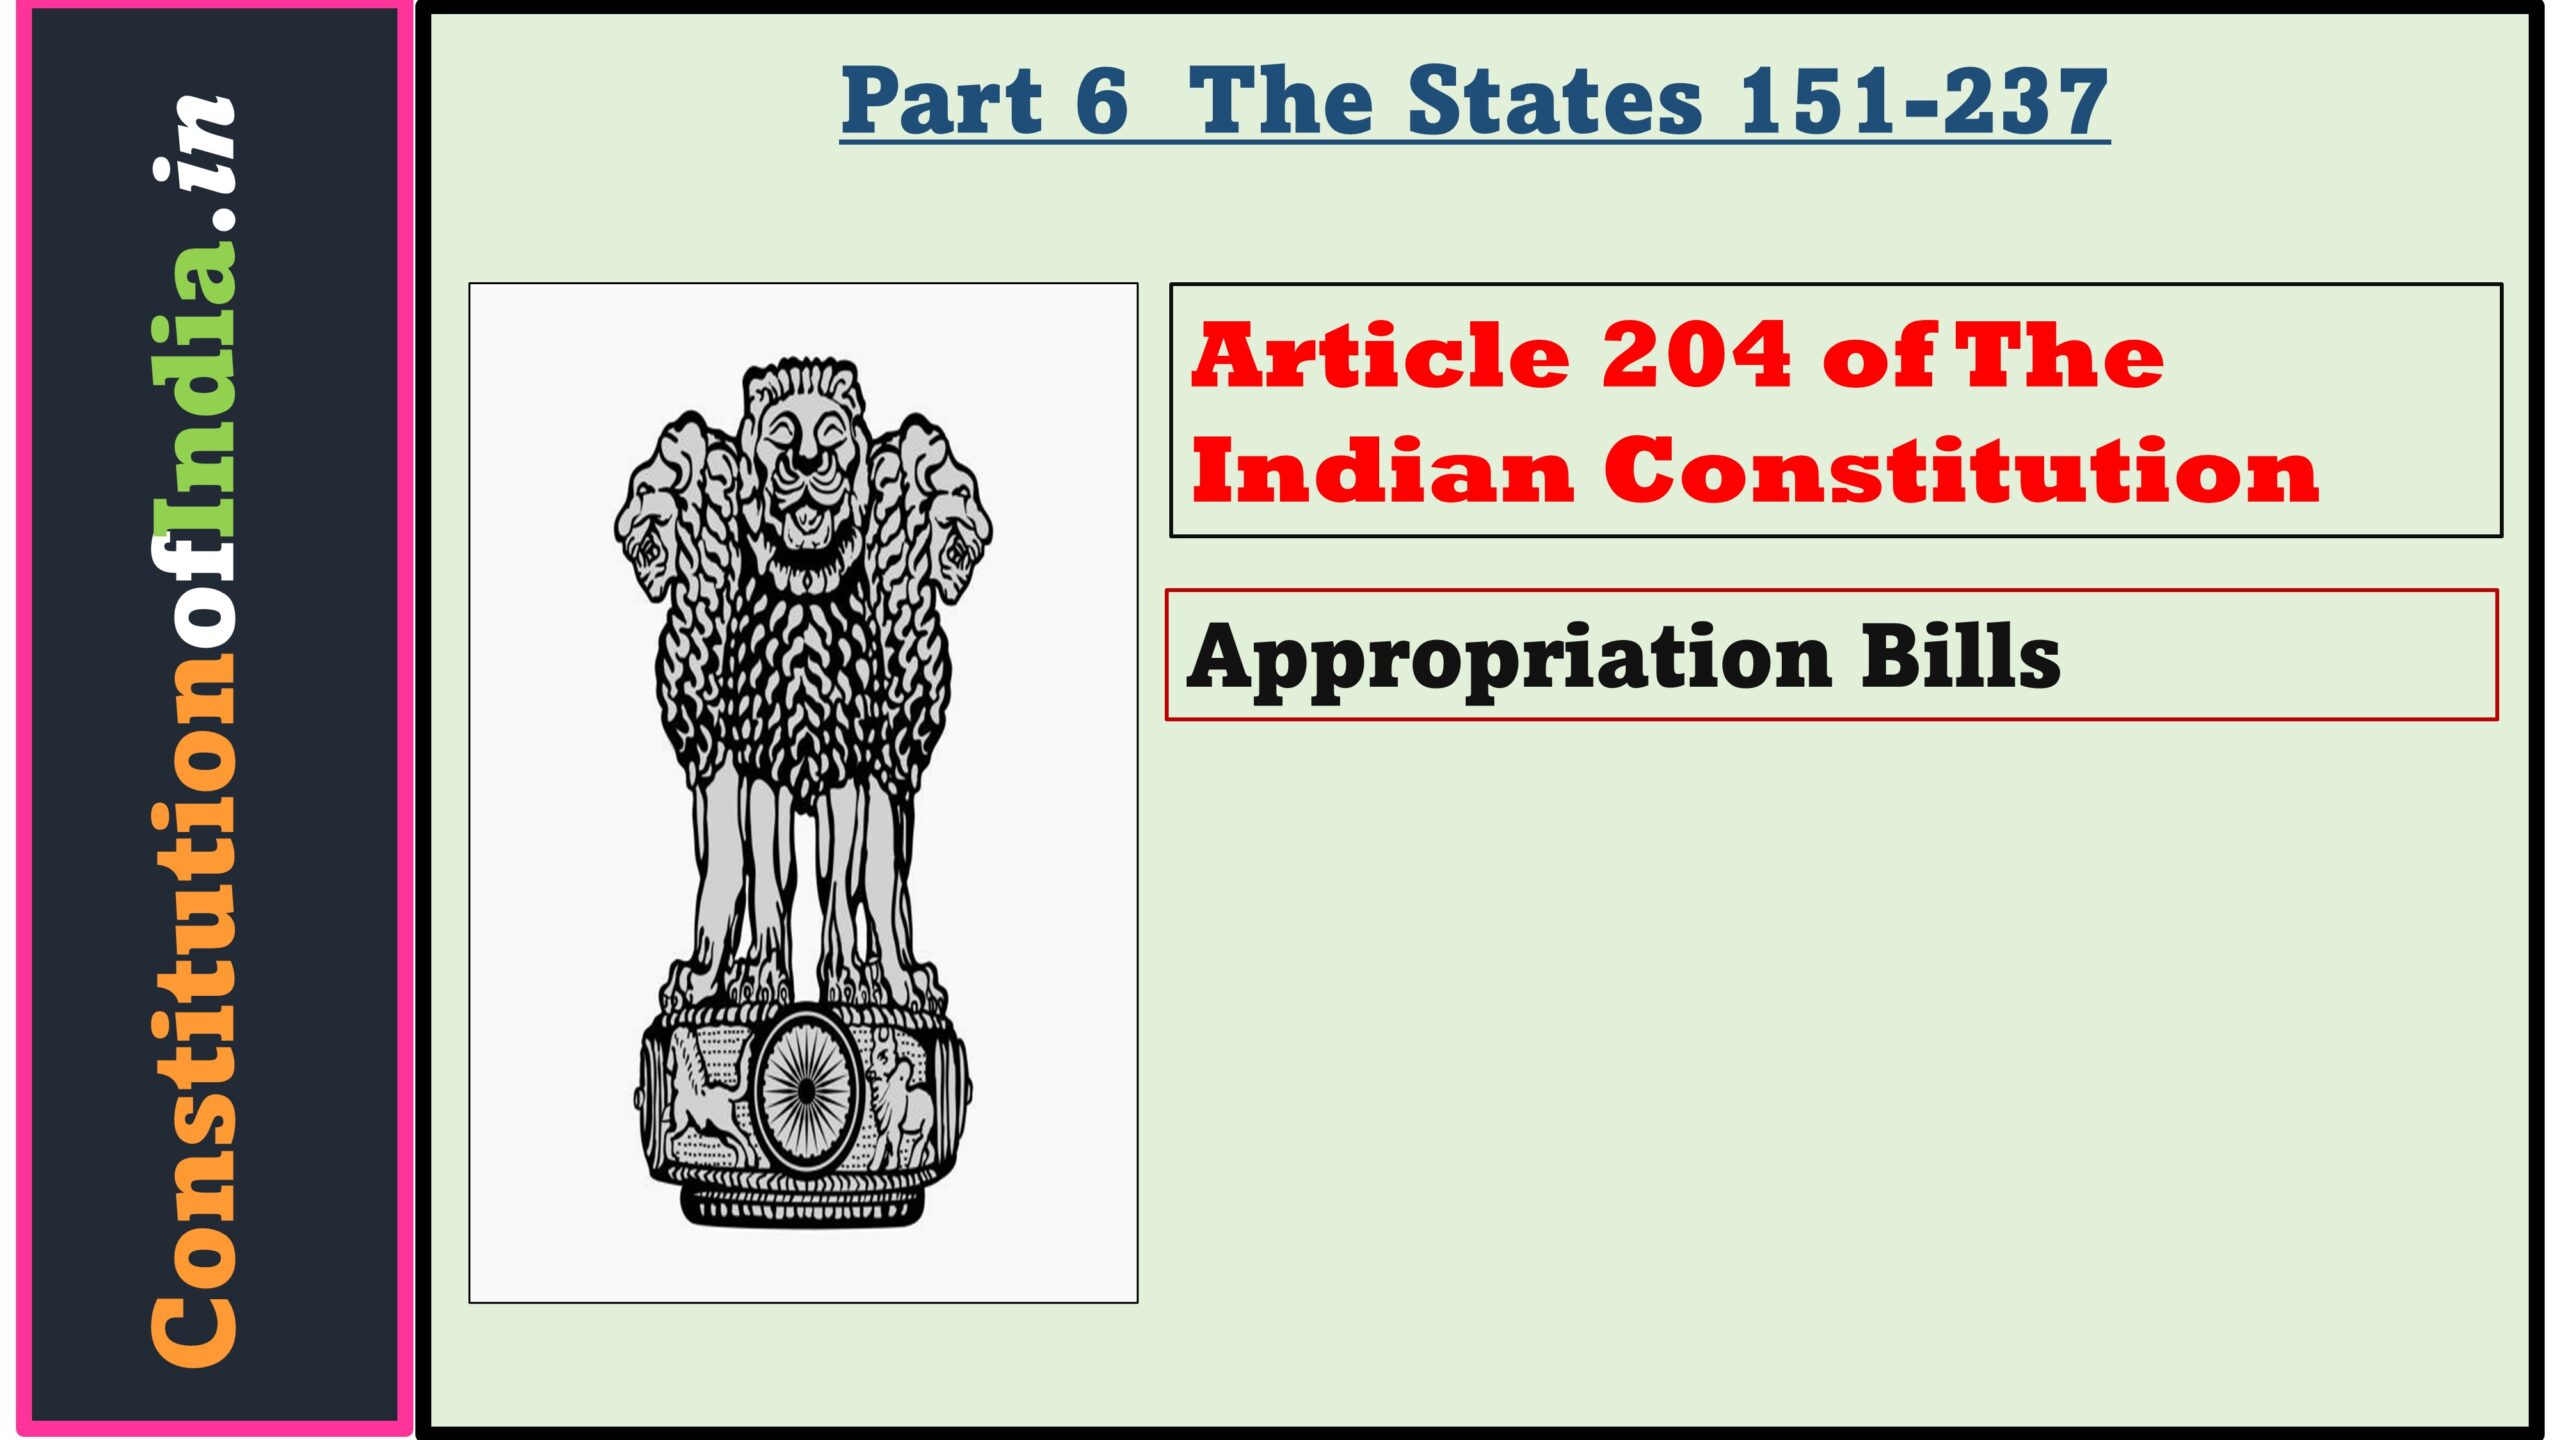 Article 204 of The Indian Constitution